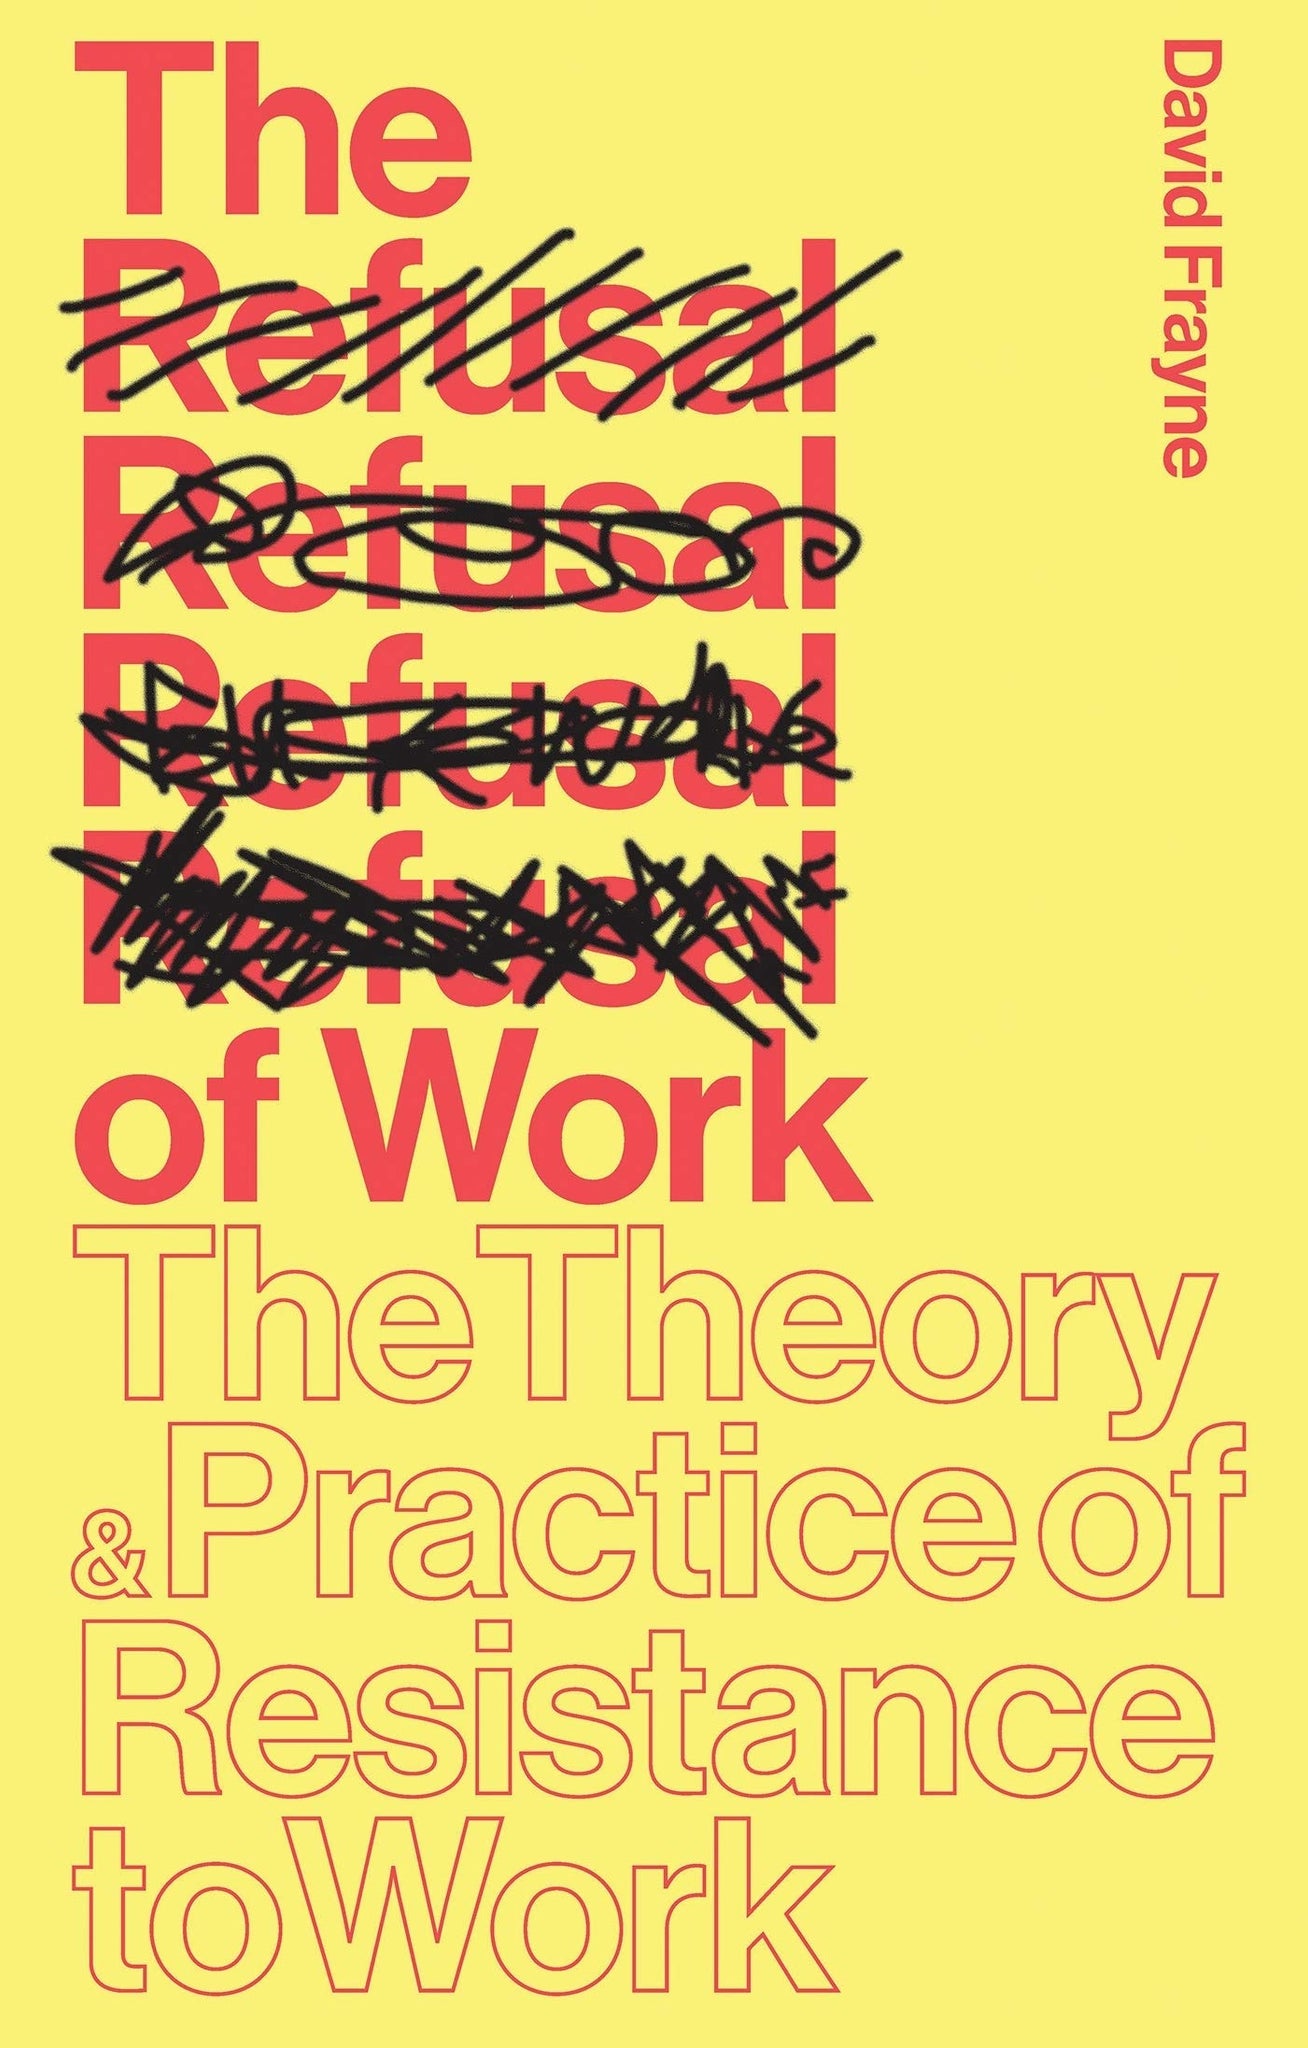 The Refusal of Work: The Theory & Practice of Resistance to Work by David Frayne